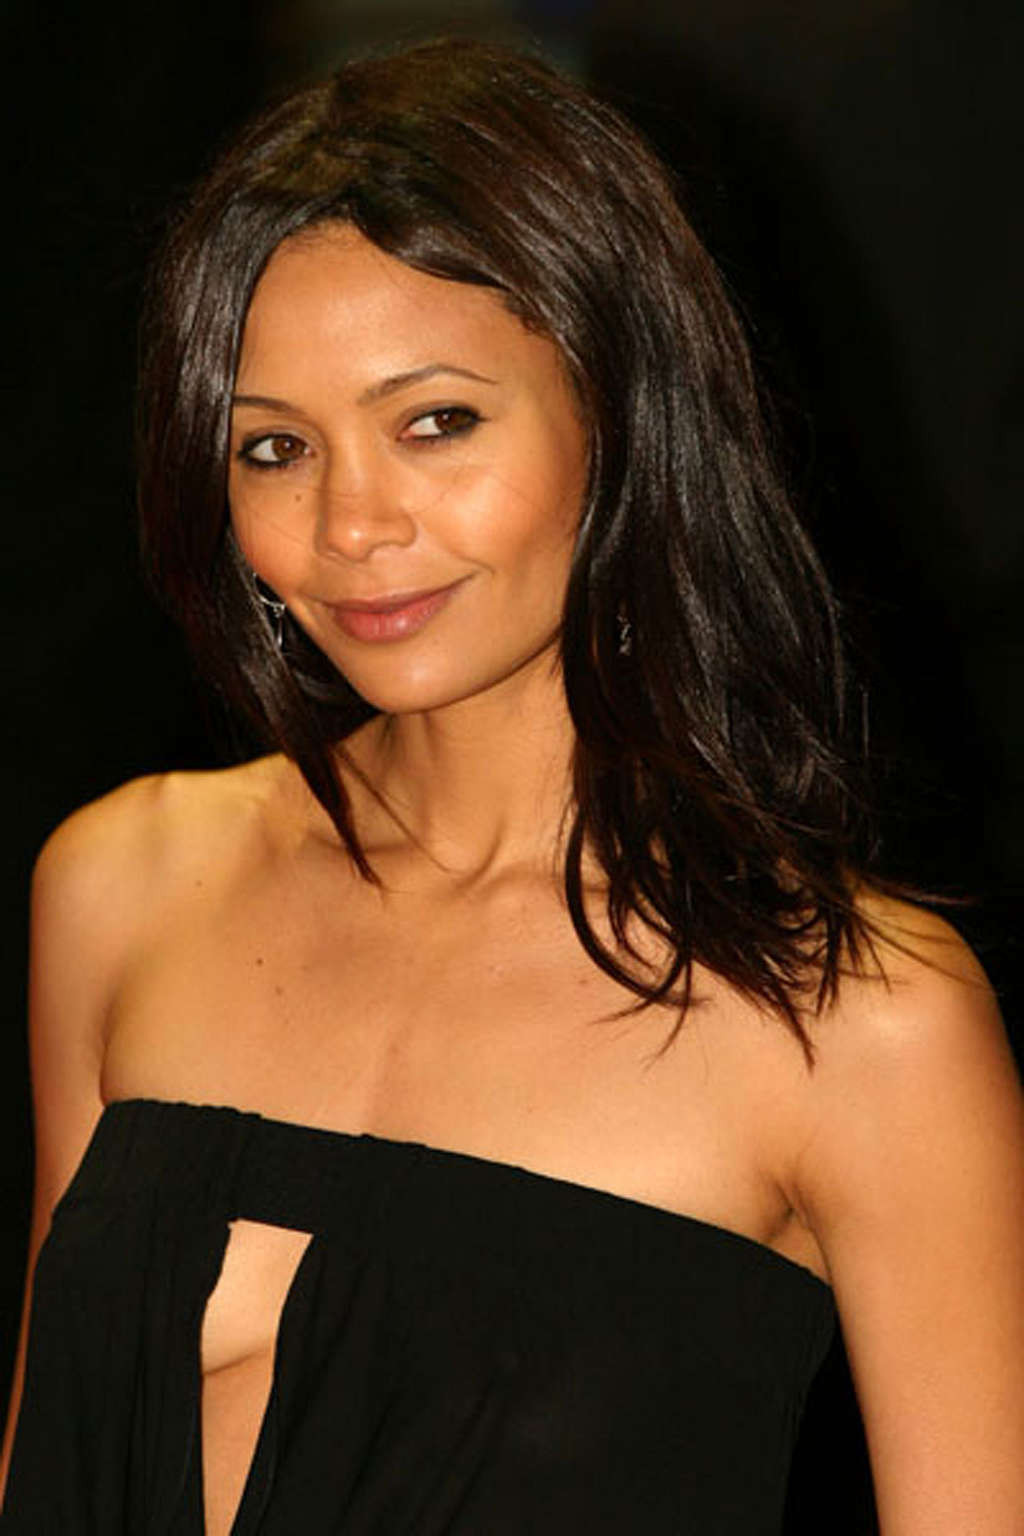 Thandie Newton showing her tits and thong slip paparazzi shoots #75359100